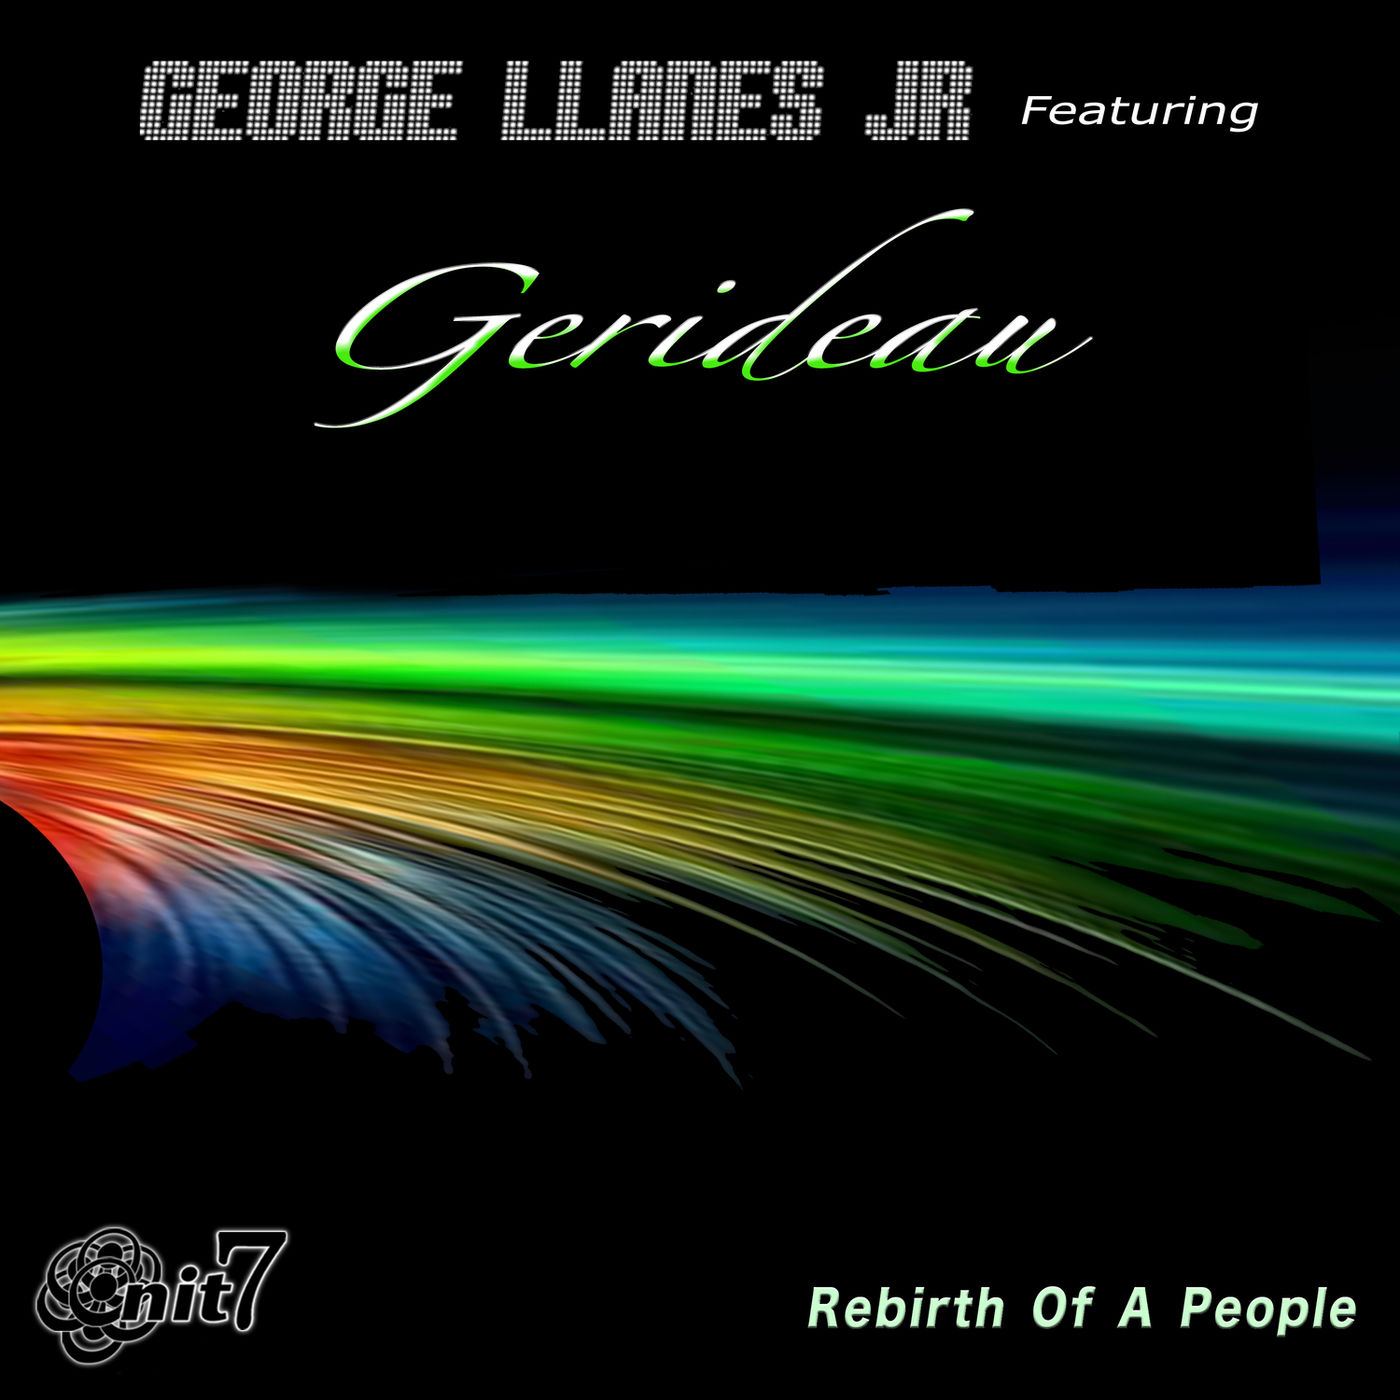 George Llanes Jr. ft Gerideau - Rebirth of a People / Onit 7 Records